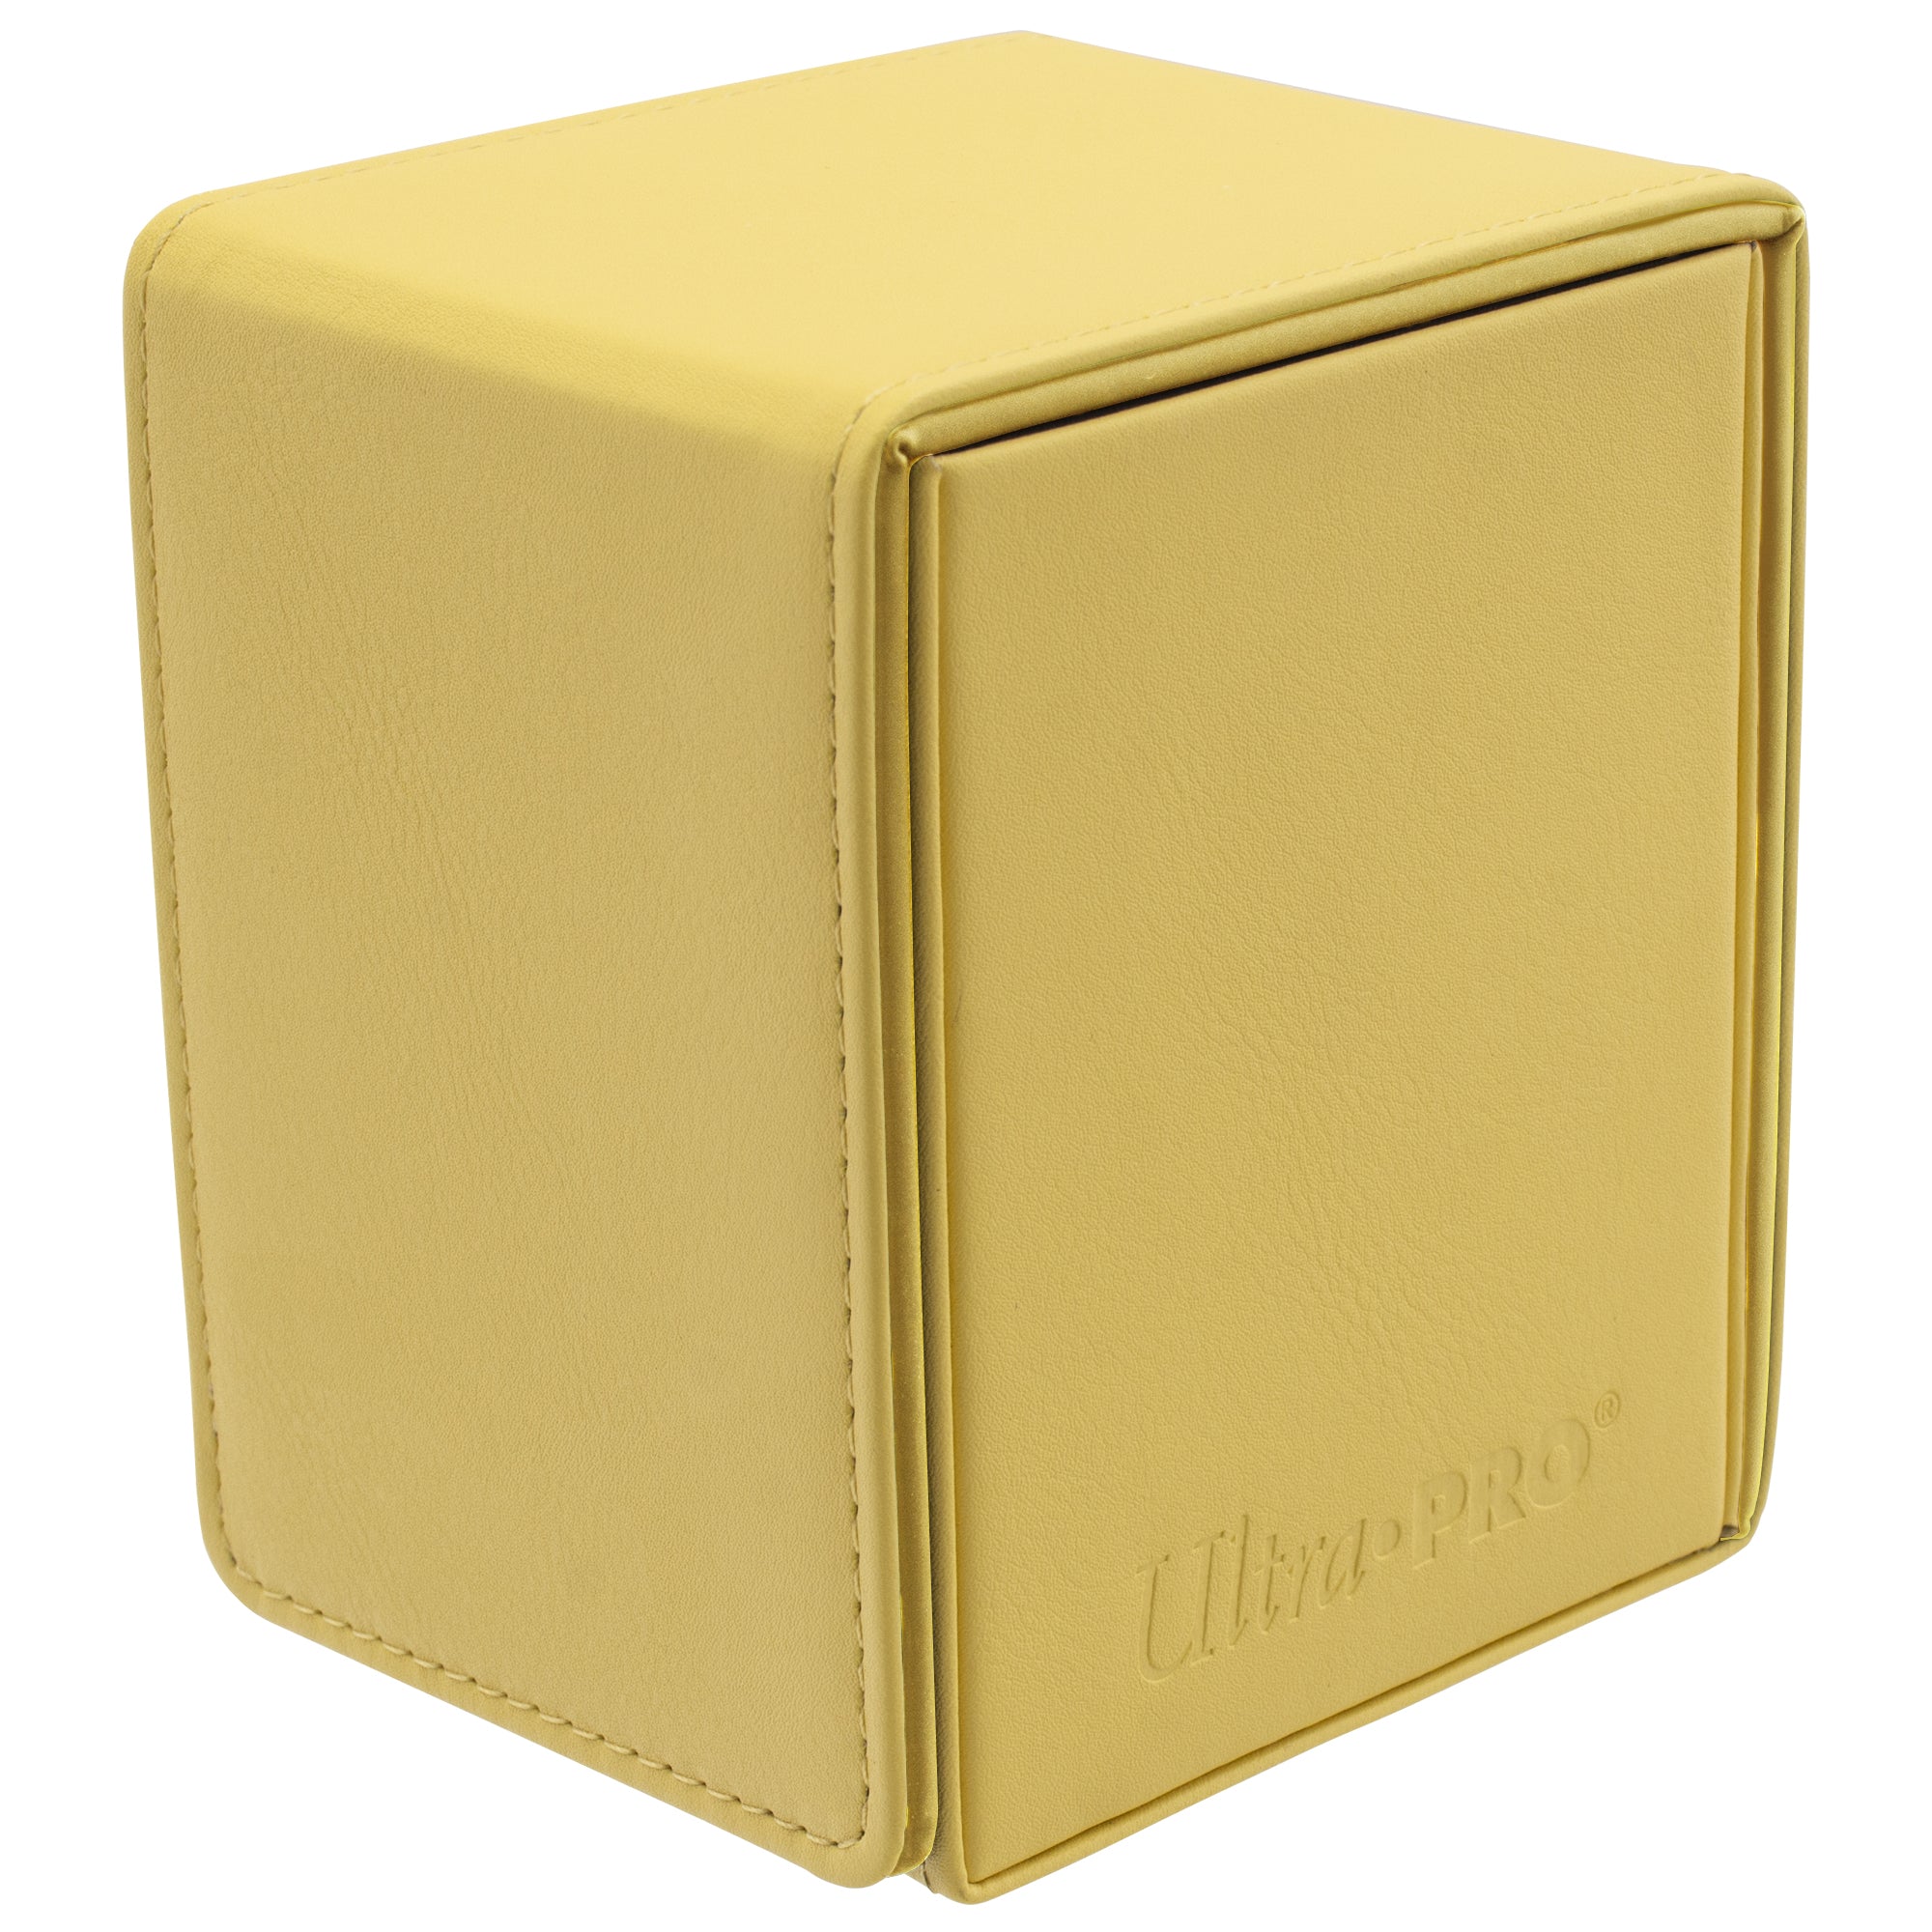 UP D-BOX ALCOVE FLIP VIVID YELLOW | Jack's On Queen